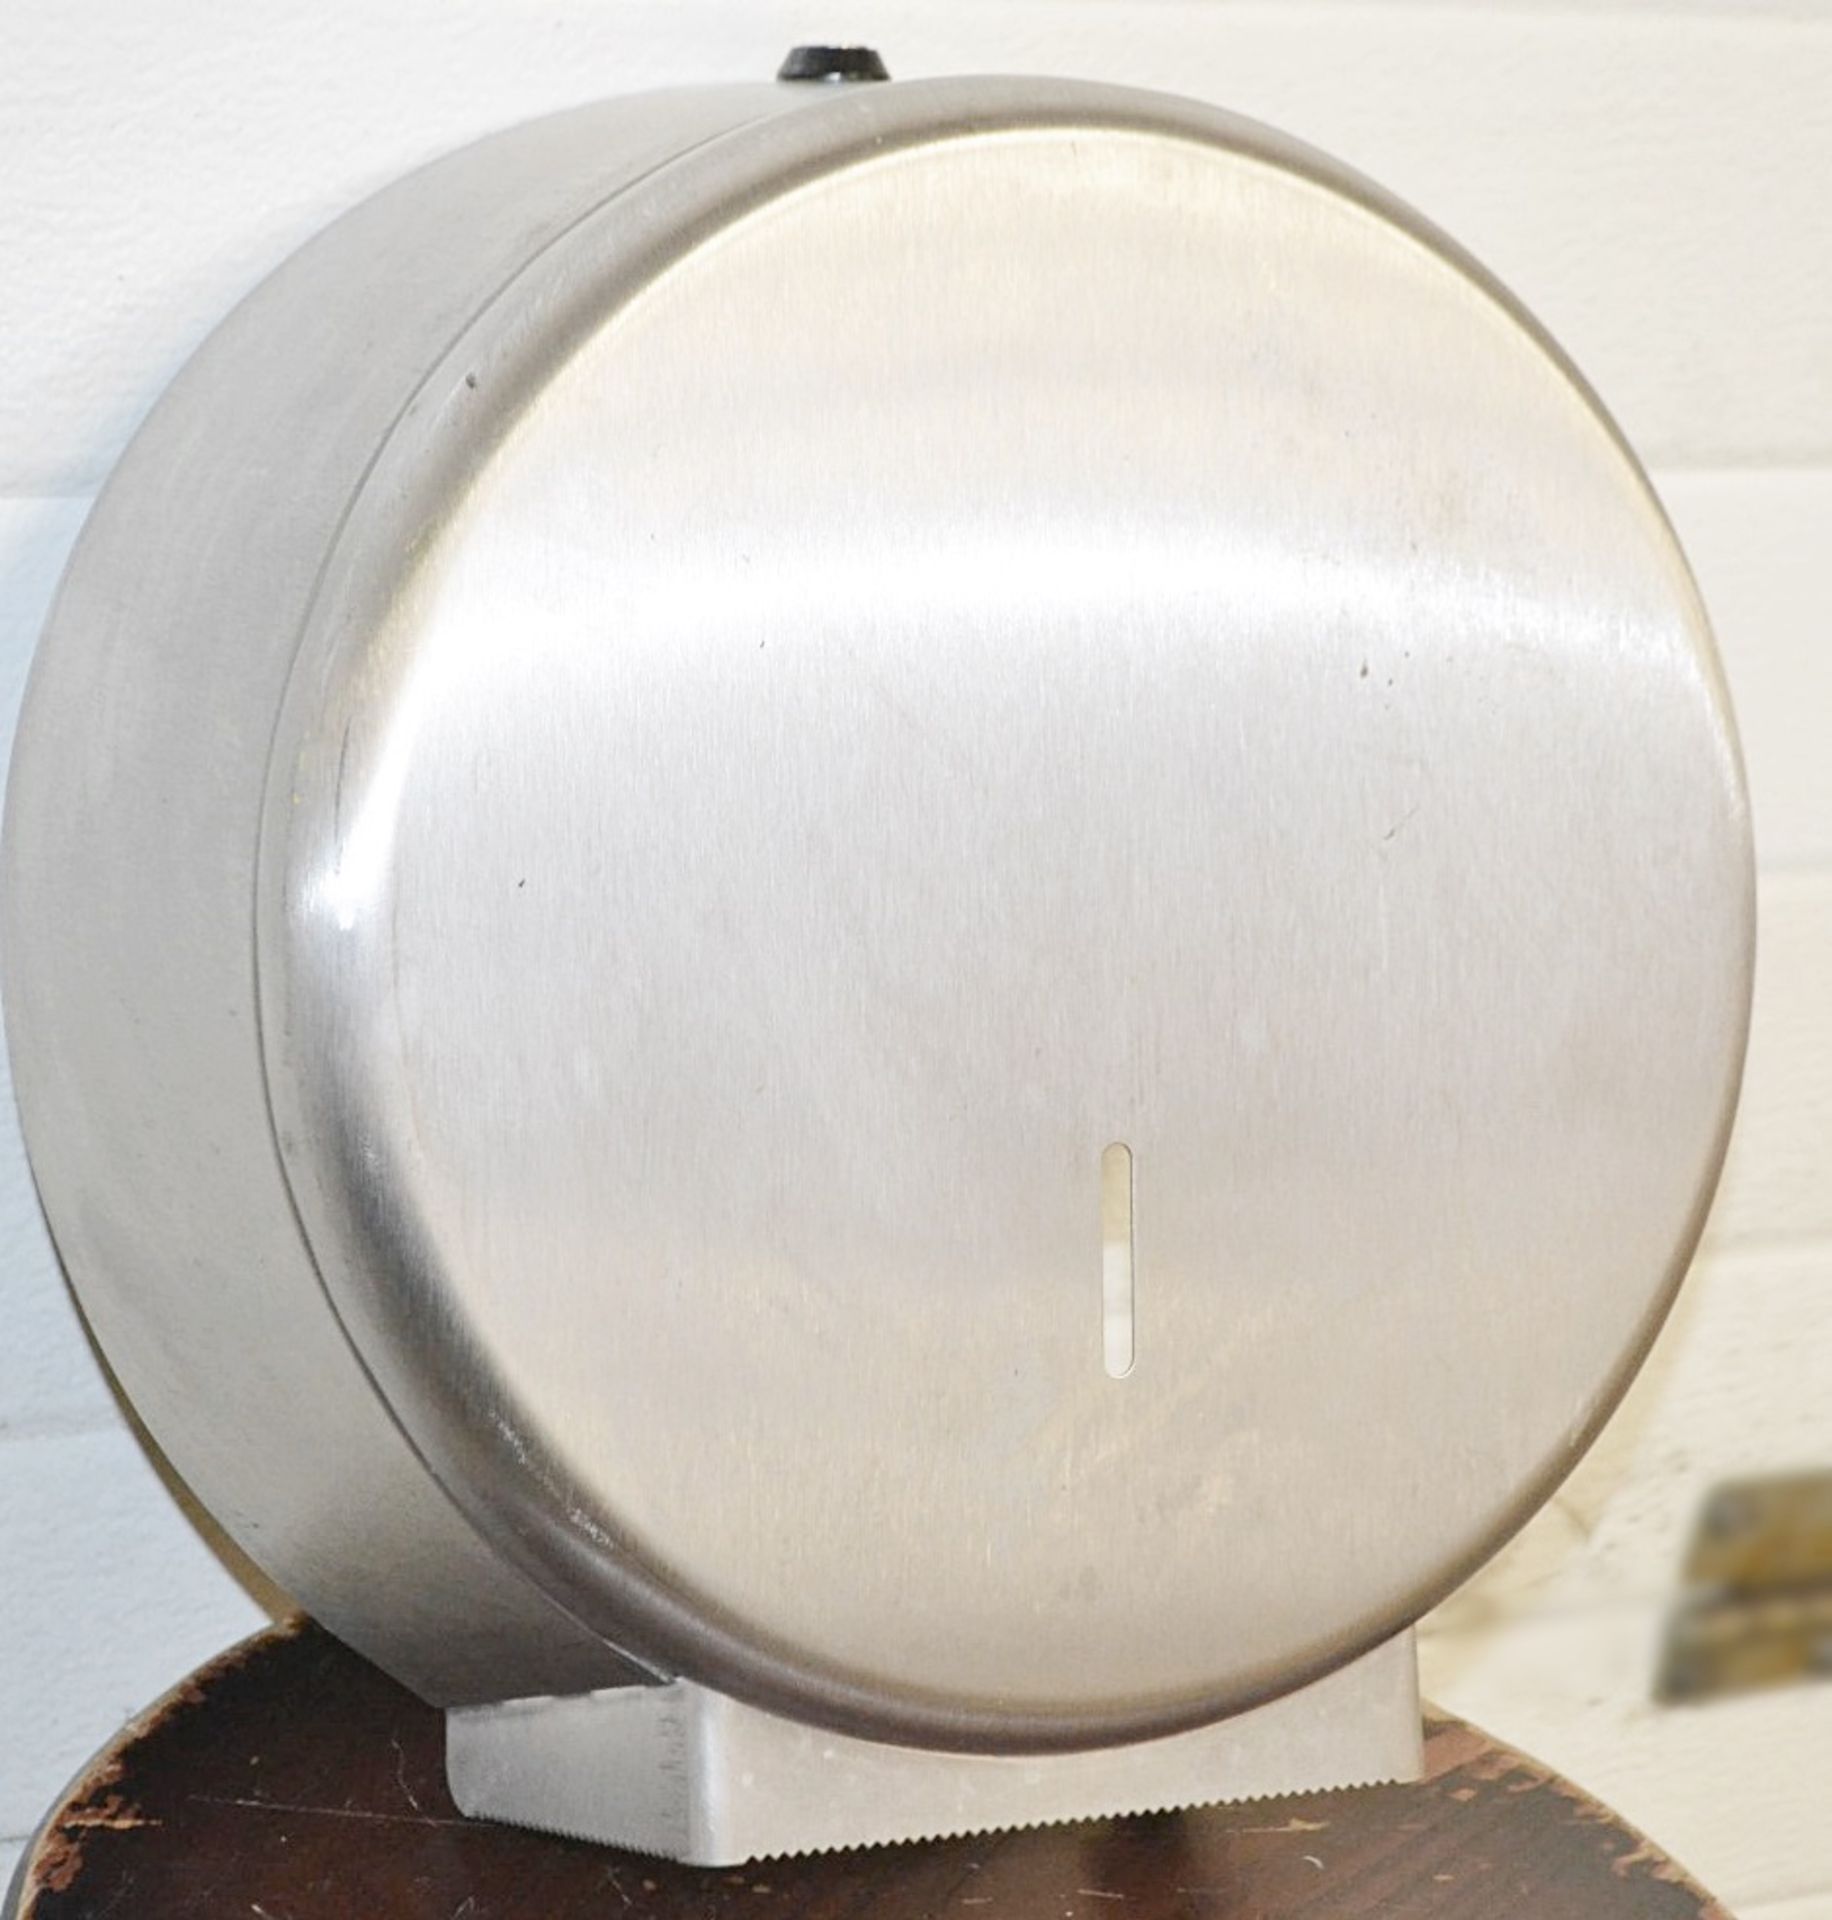 4 x Stainless Steel Jumbo Toilet Roll Dispensers - Recently Taken From A Working Commercial Premises